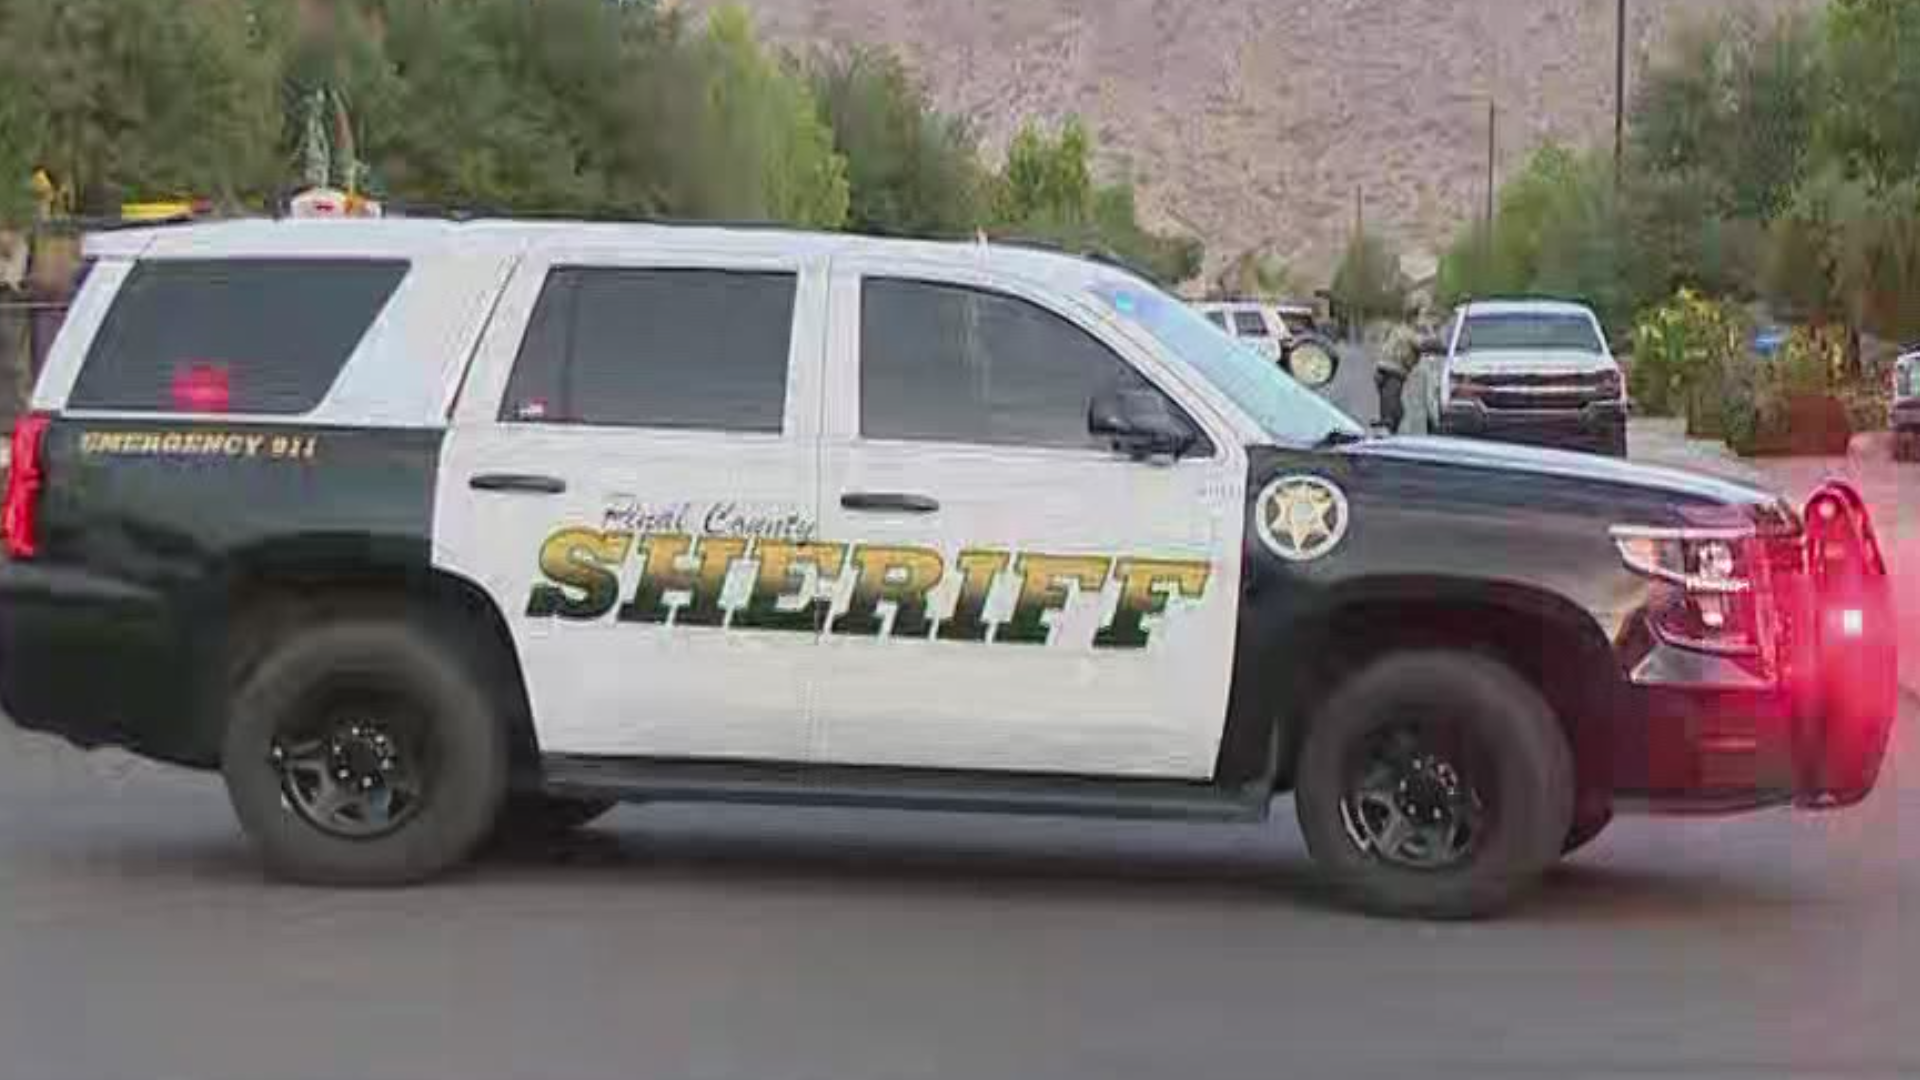 Deputies from the Pinal County Sheriff's Office shot and killed a man early Wednesday morning during a domestic violence incident, the sheriff's office said.